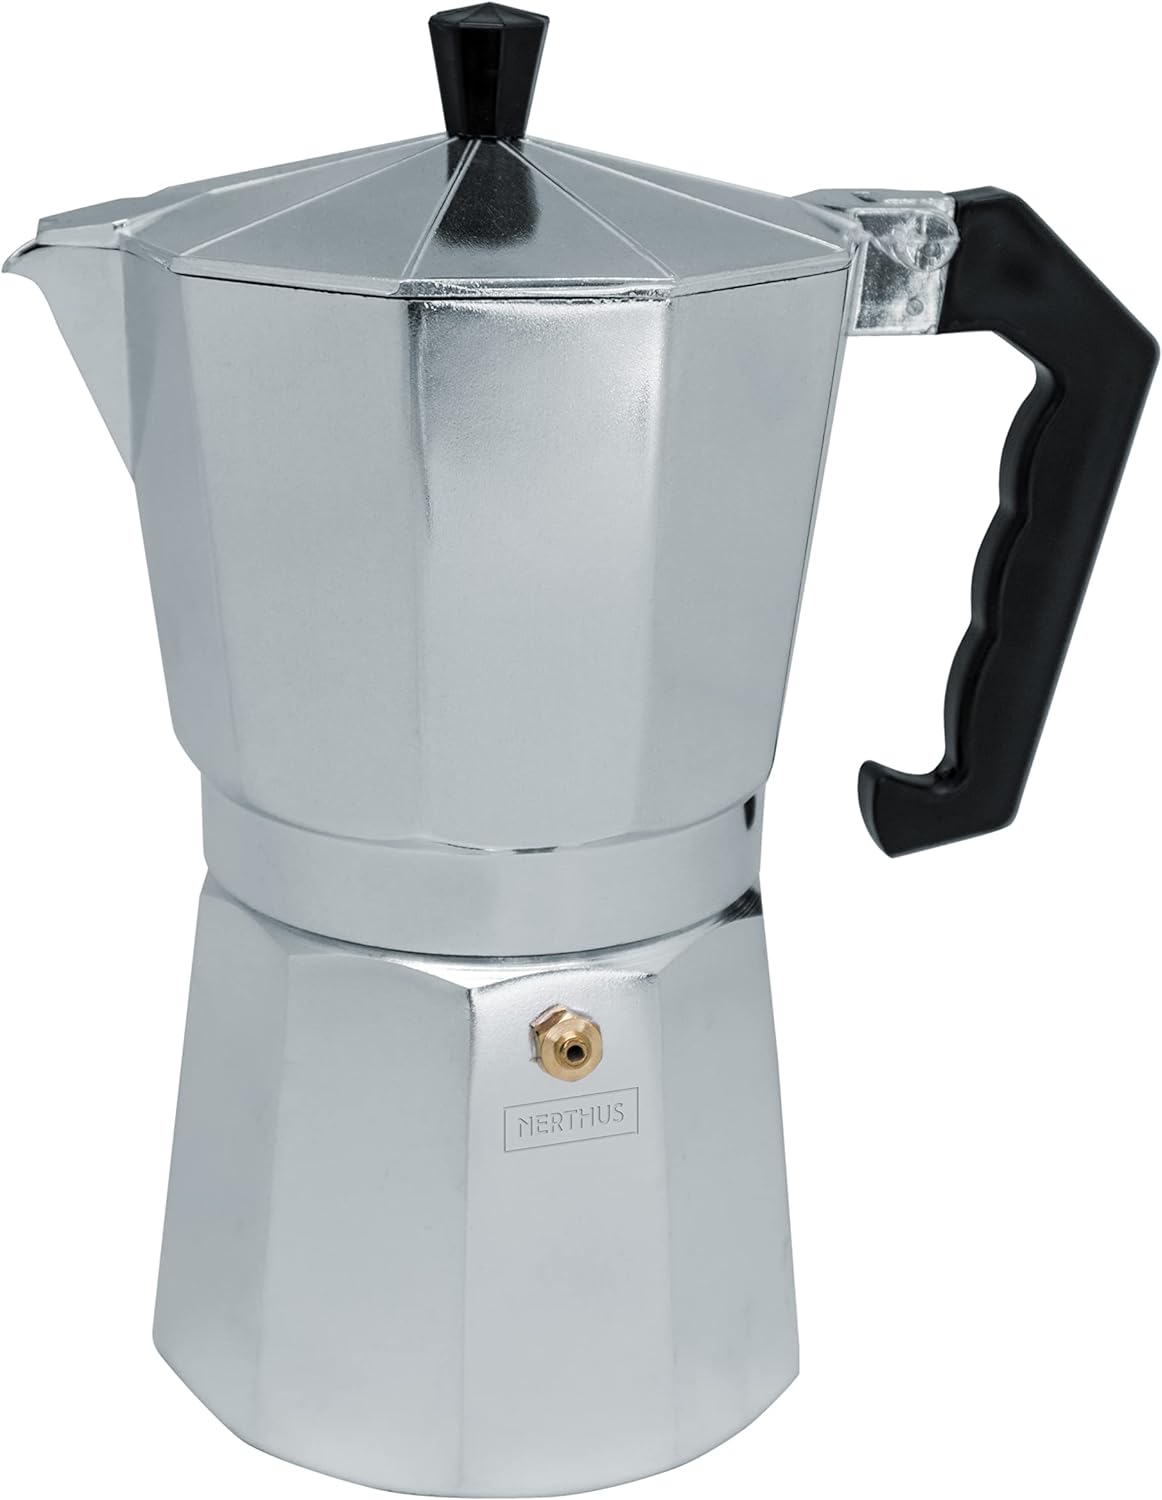 Nerthus fih 836 induction coffee maker 12 cup classic Italian coffee maker